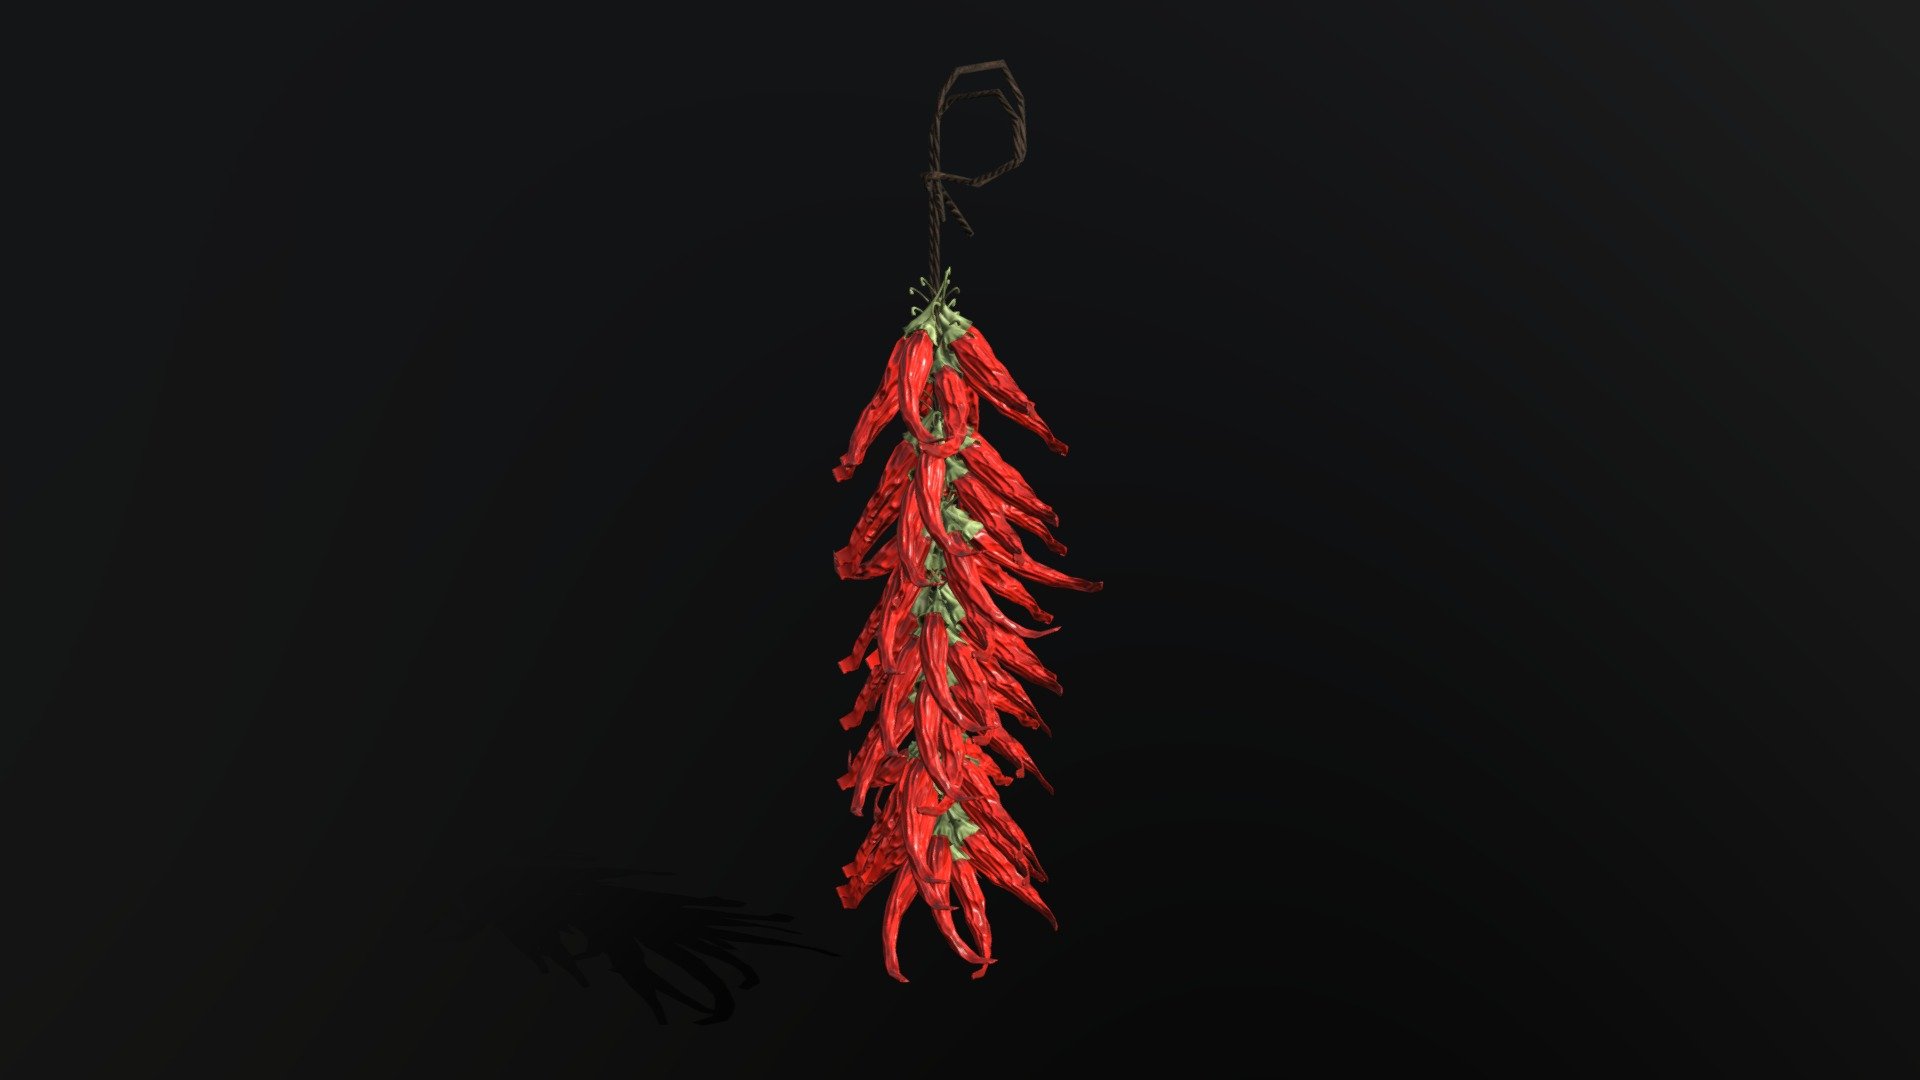 Low poly game asset of dried chili peppers hanging from a rope. Perfect for medieval or village environments and dioramas 3d model